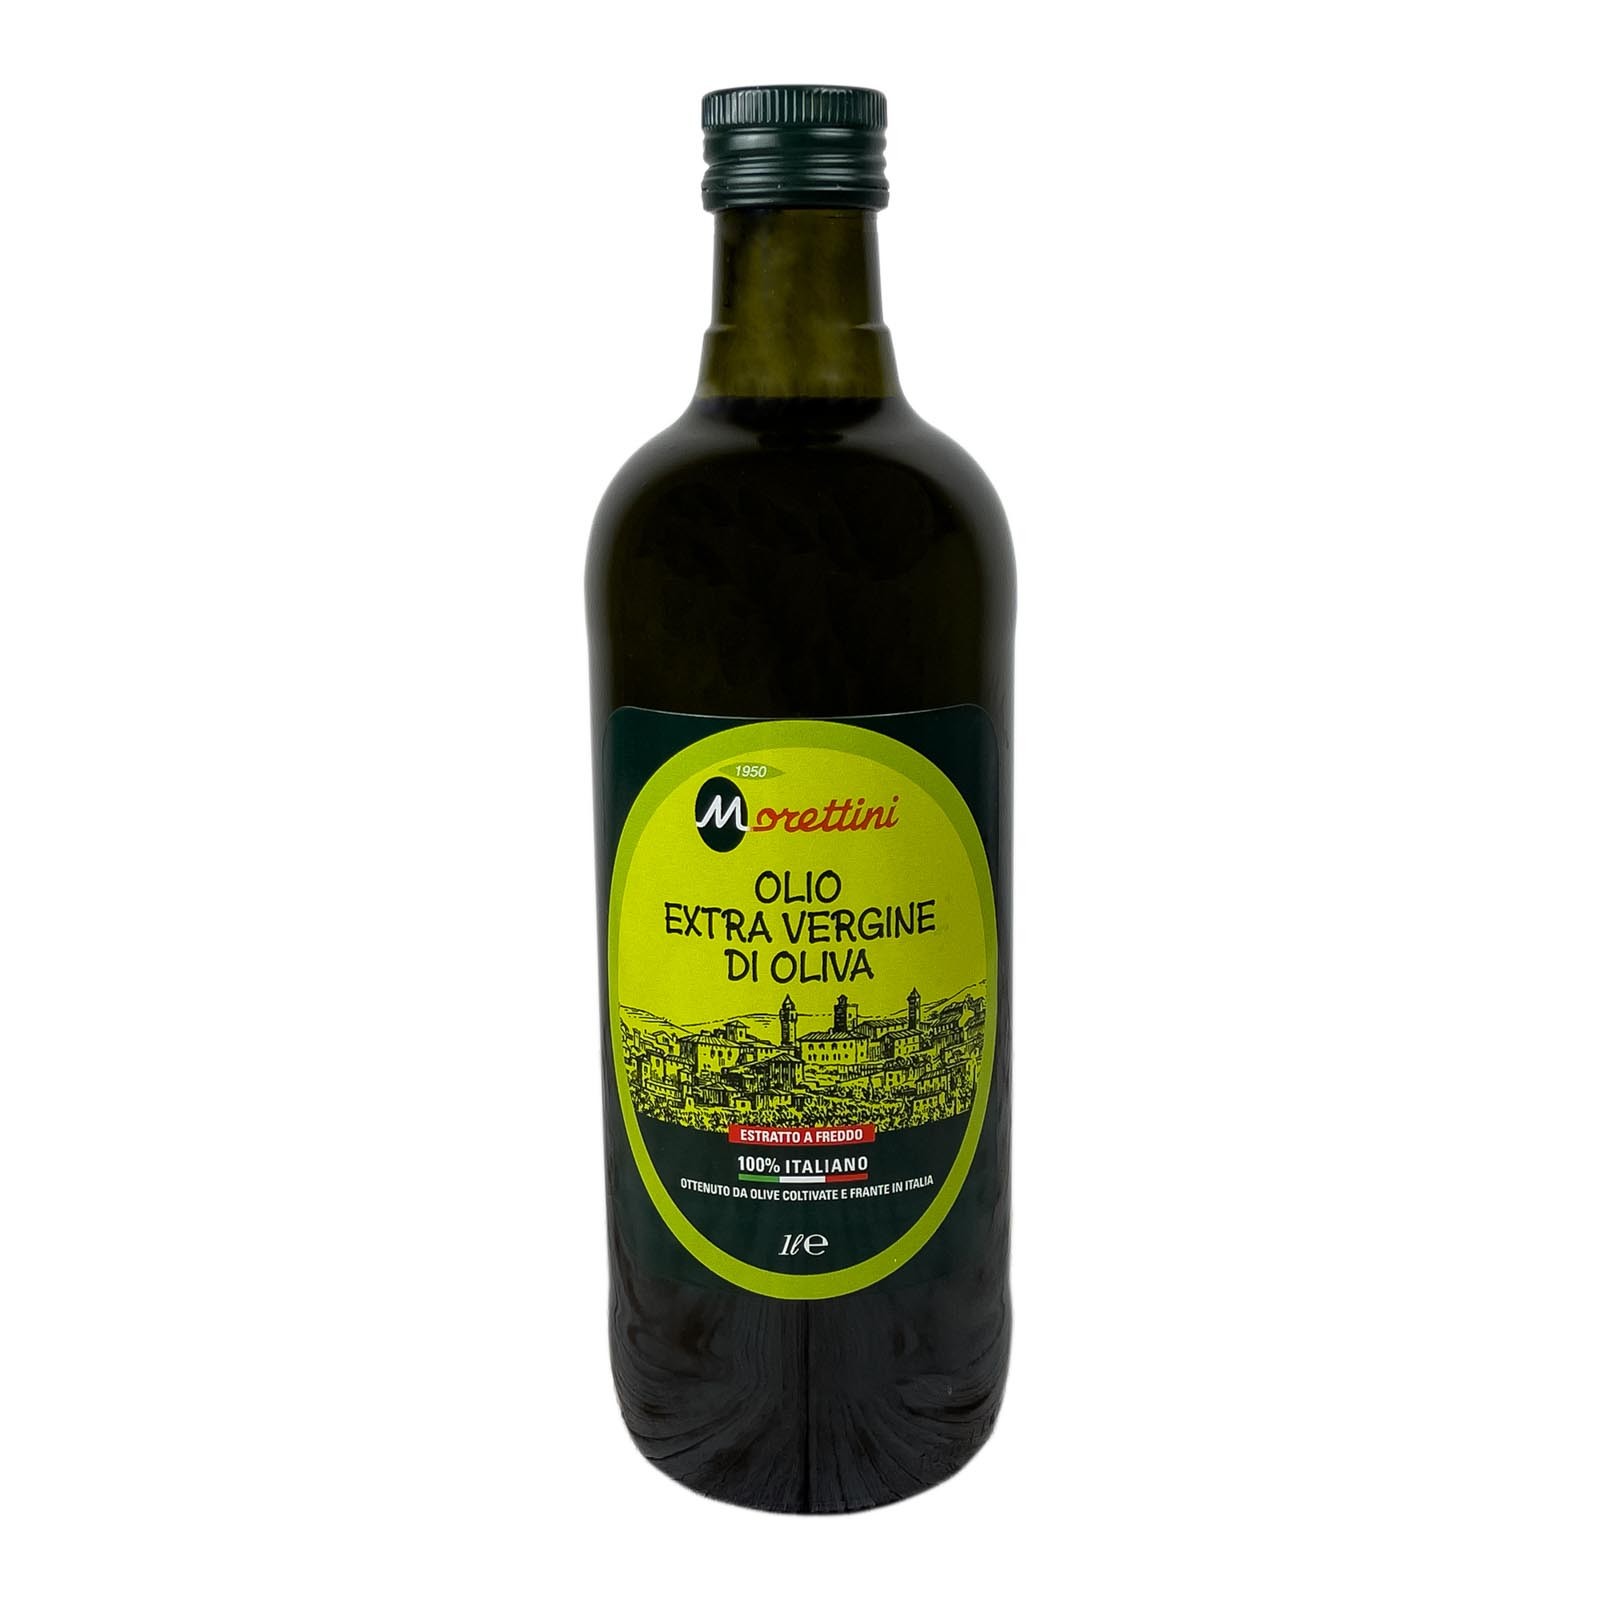 “Morettini 100% Italiano”, extra virgin olive oil, produced from a skilful blend of the best extra virgin oils of central Italy - Year of production 2021/2022.